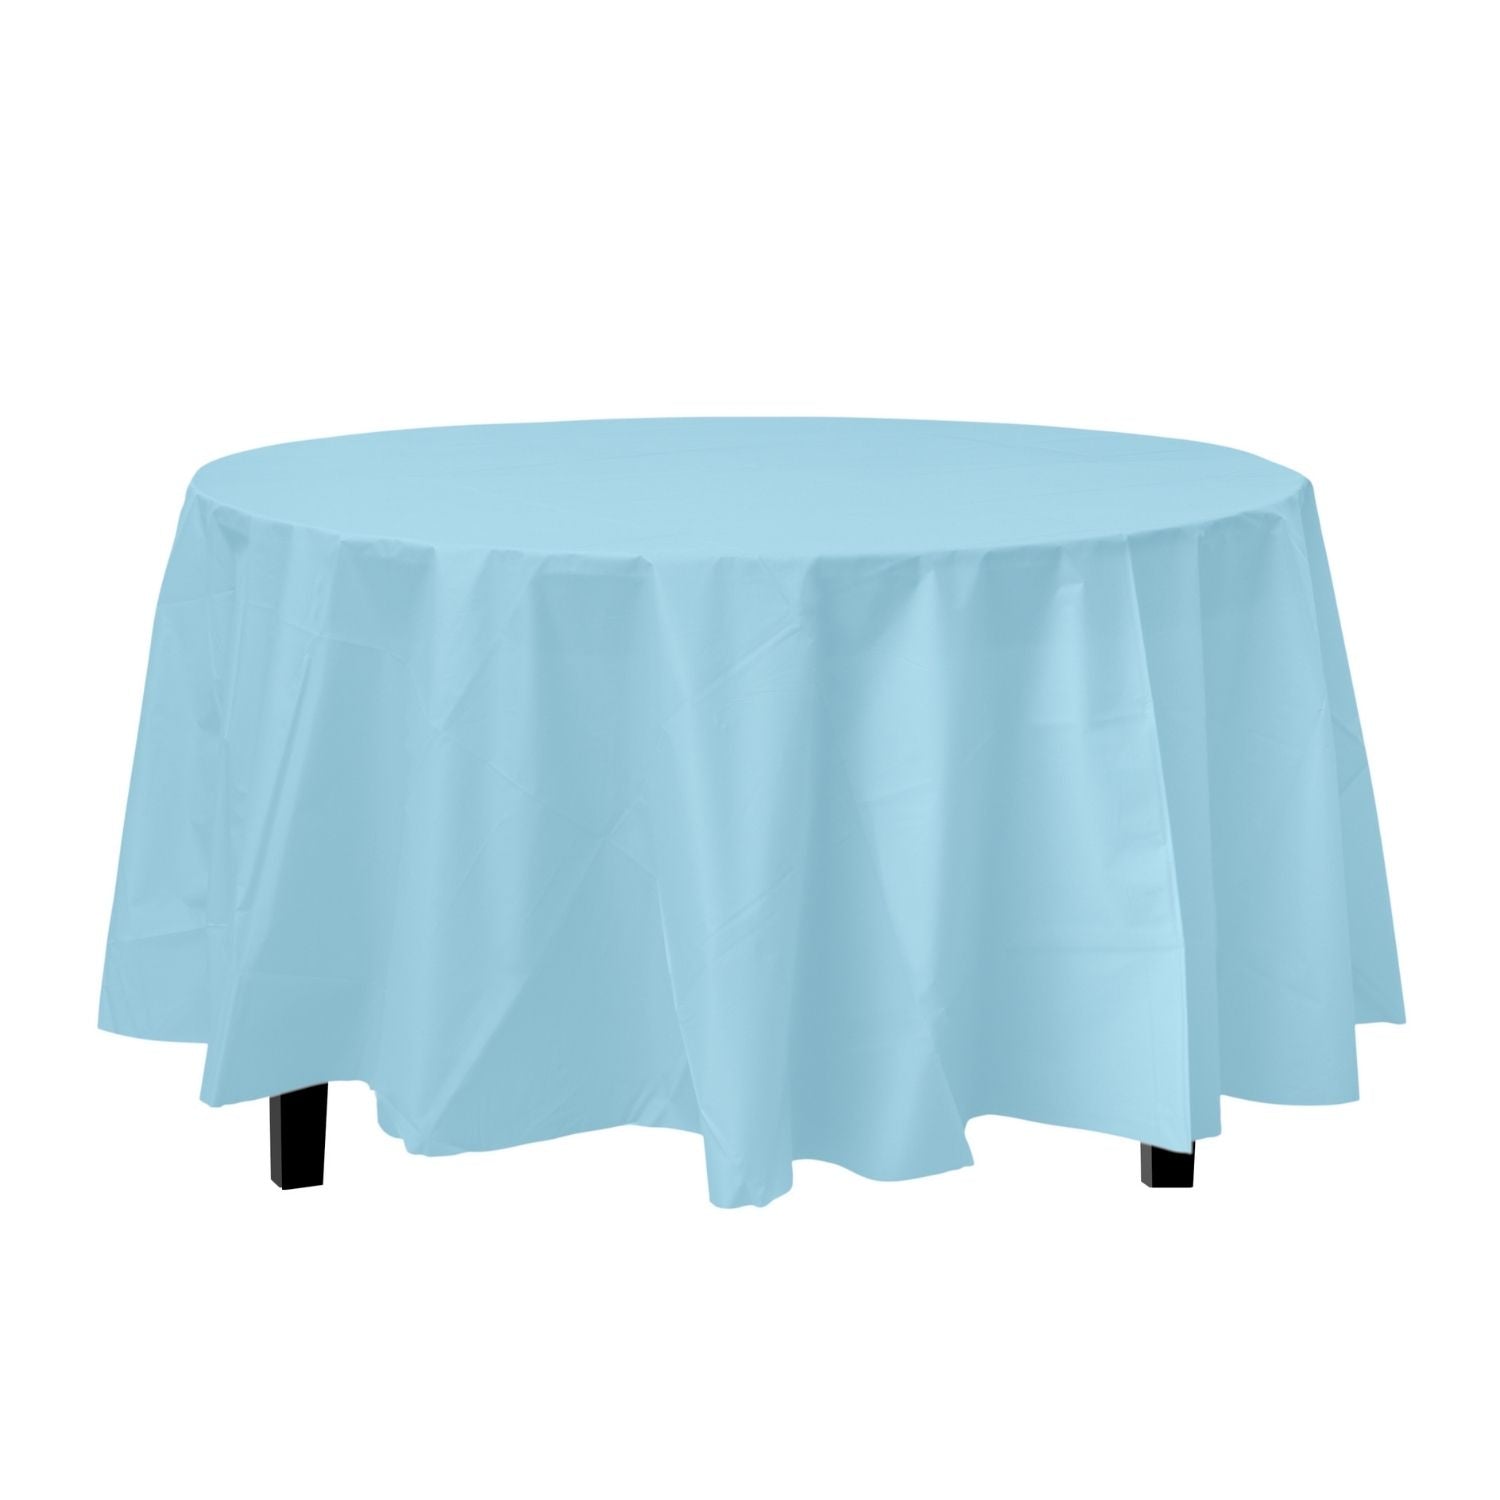 Light Blue Round Plastic Tablecloth | 48 Count